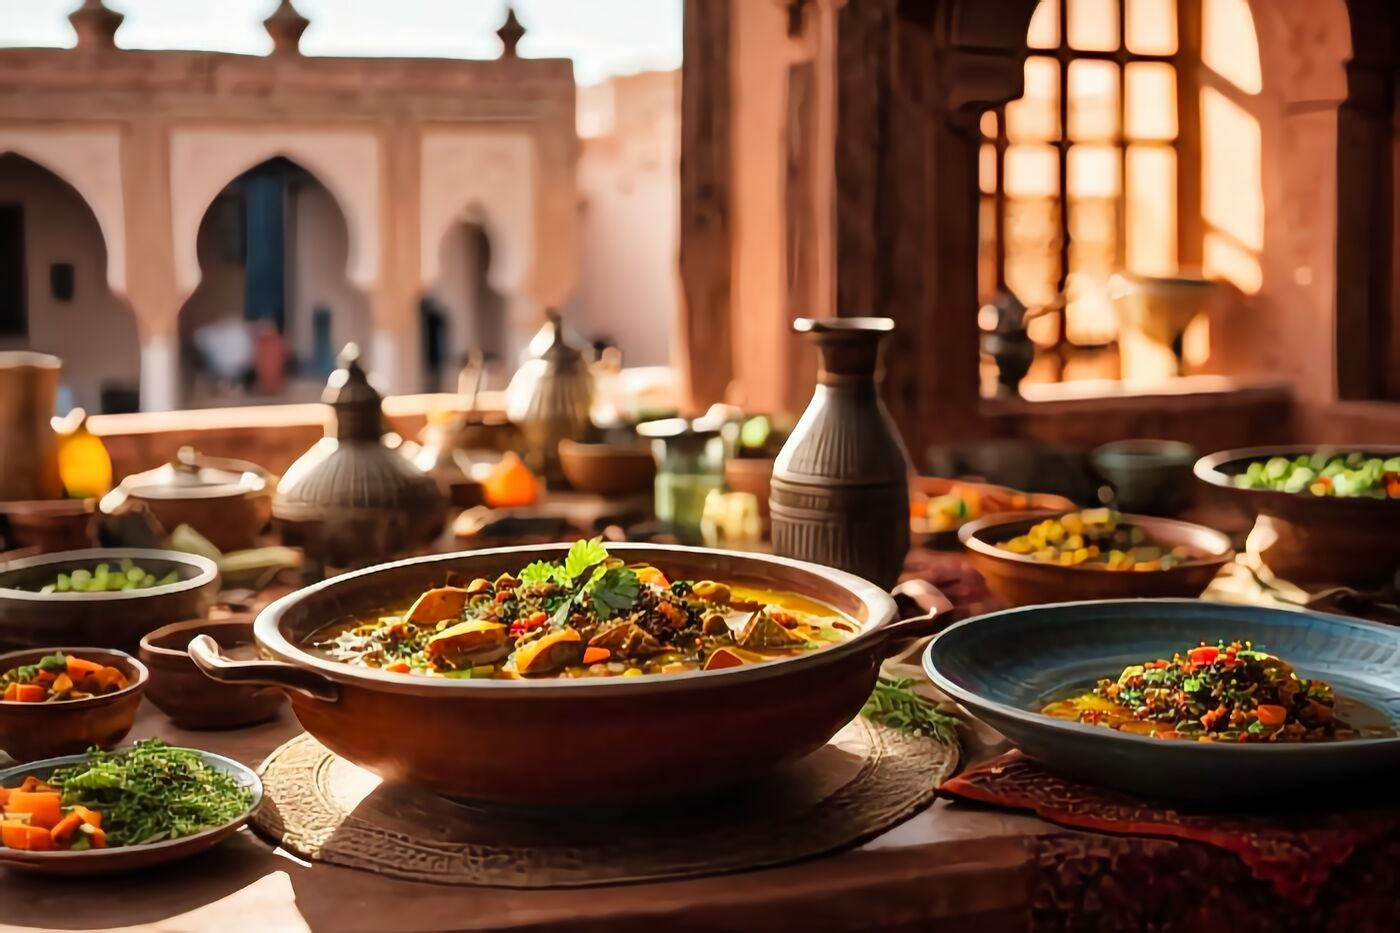 Moroccan Fish Tagine with Chermoula and Vegetables